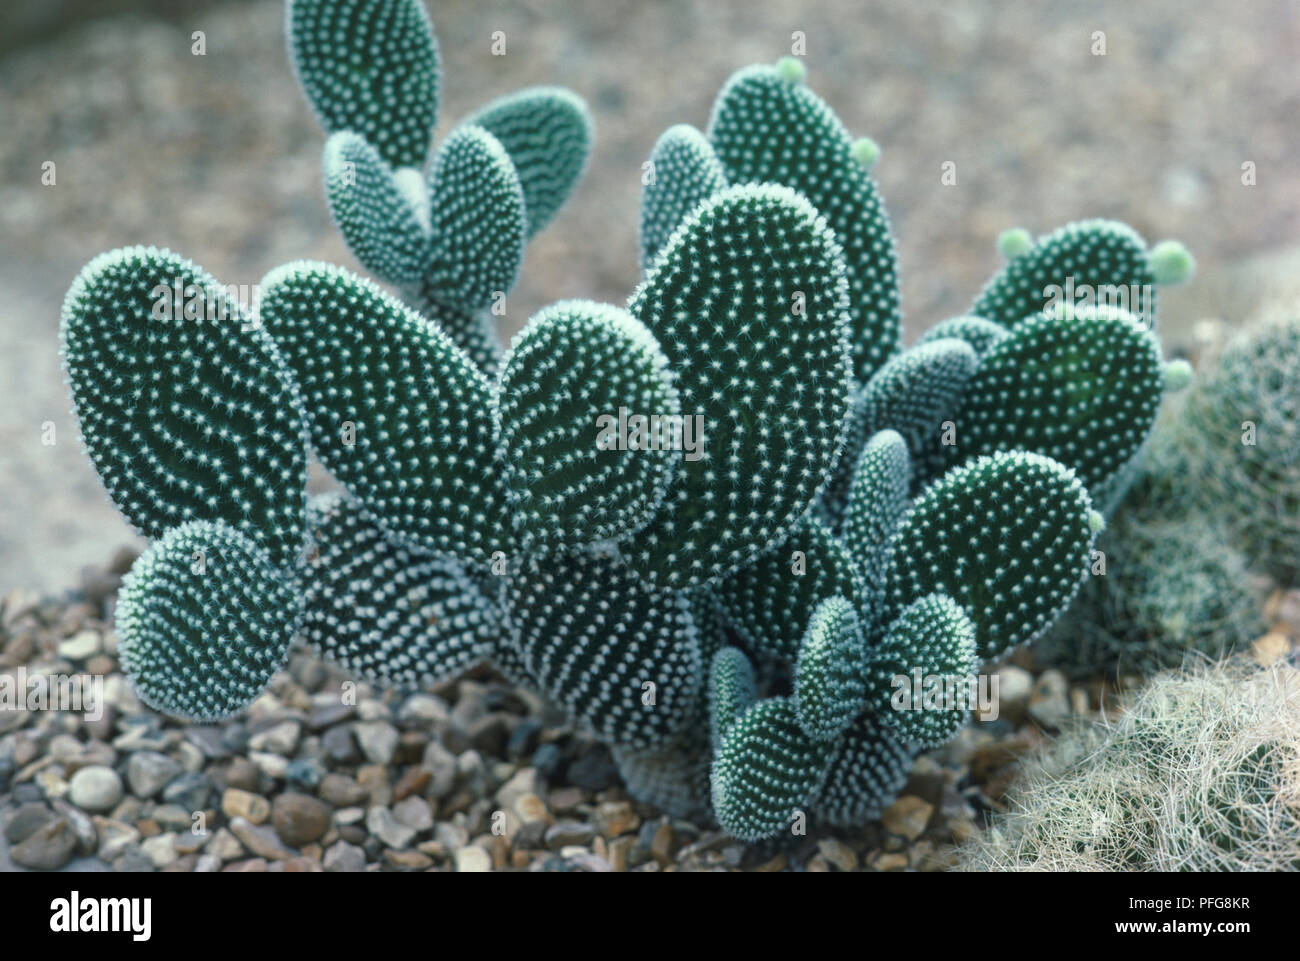 Opuntia microdasys var albispina (Bunny Ears Cactus, Bunny Cactus or Polka-dot Cactus), pad-like stems covered in numerous glochids Stock Photo